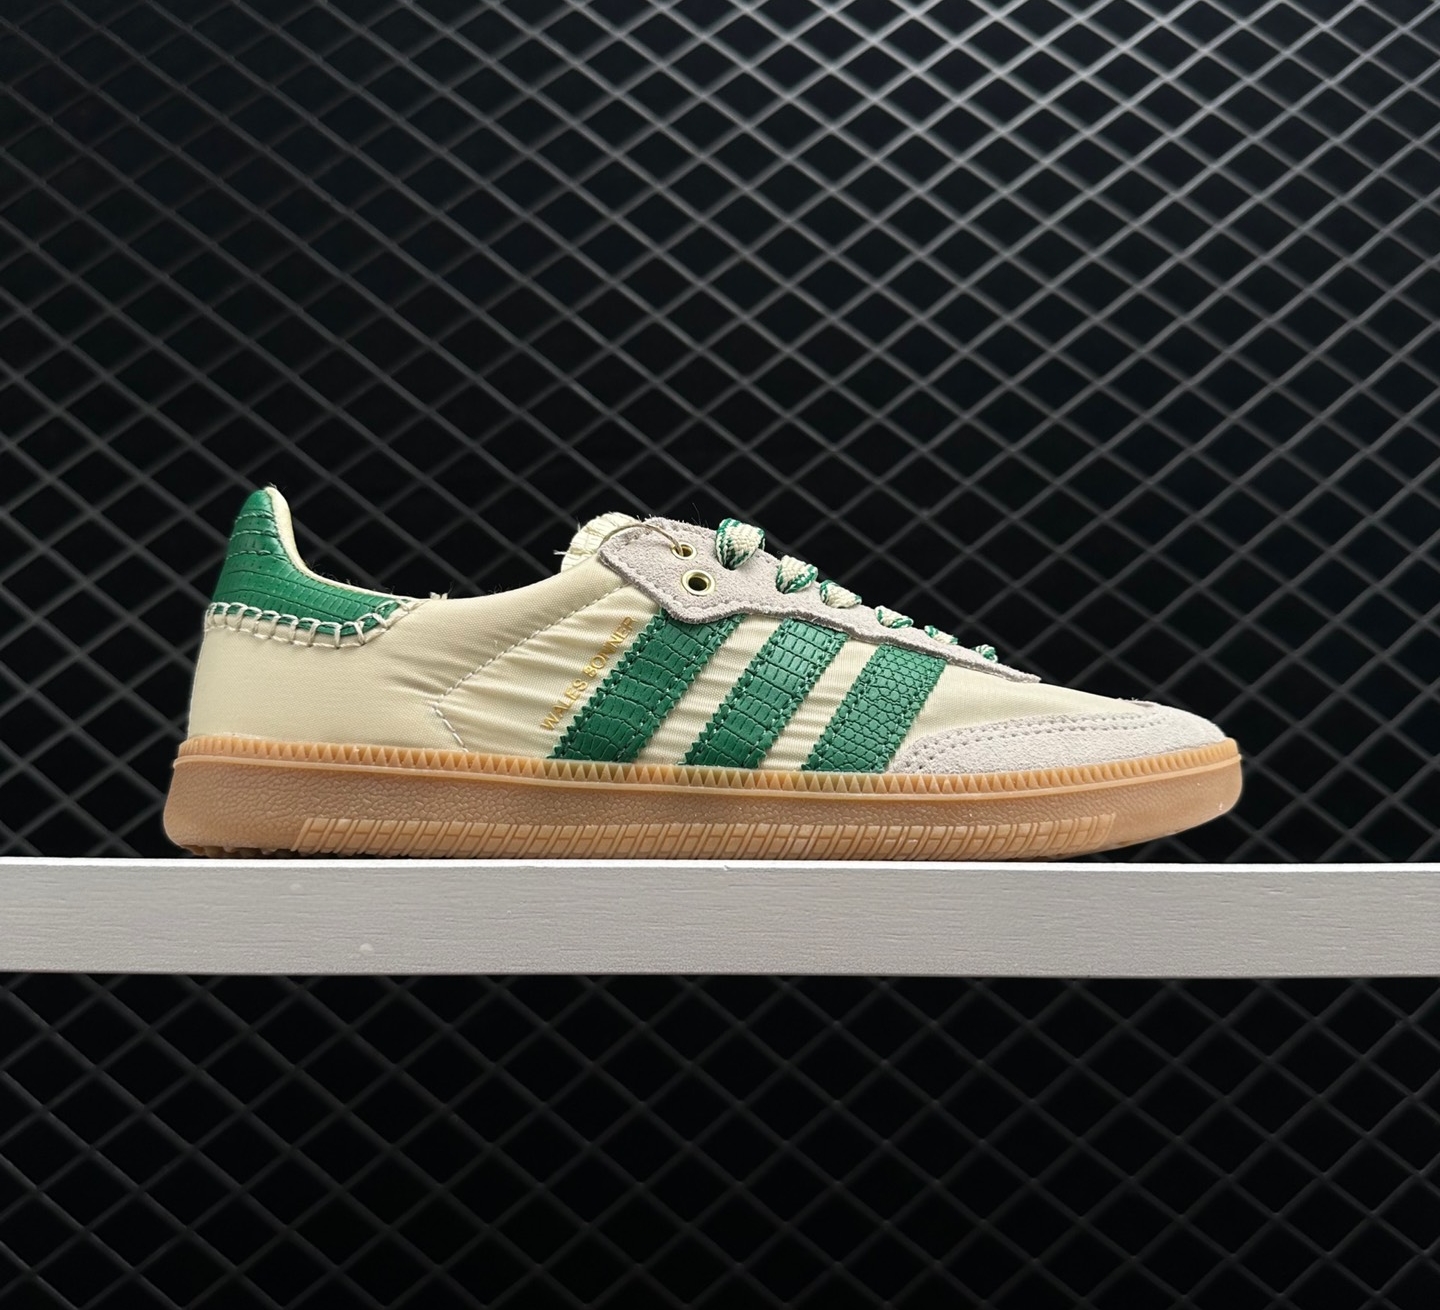 Adidas Wales Bonner x Samba 'Cream White Bold Green' GY4344 - Unique Collaboration for a Stylish Update!